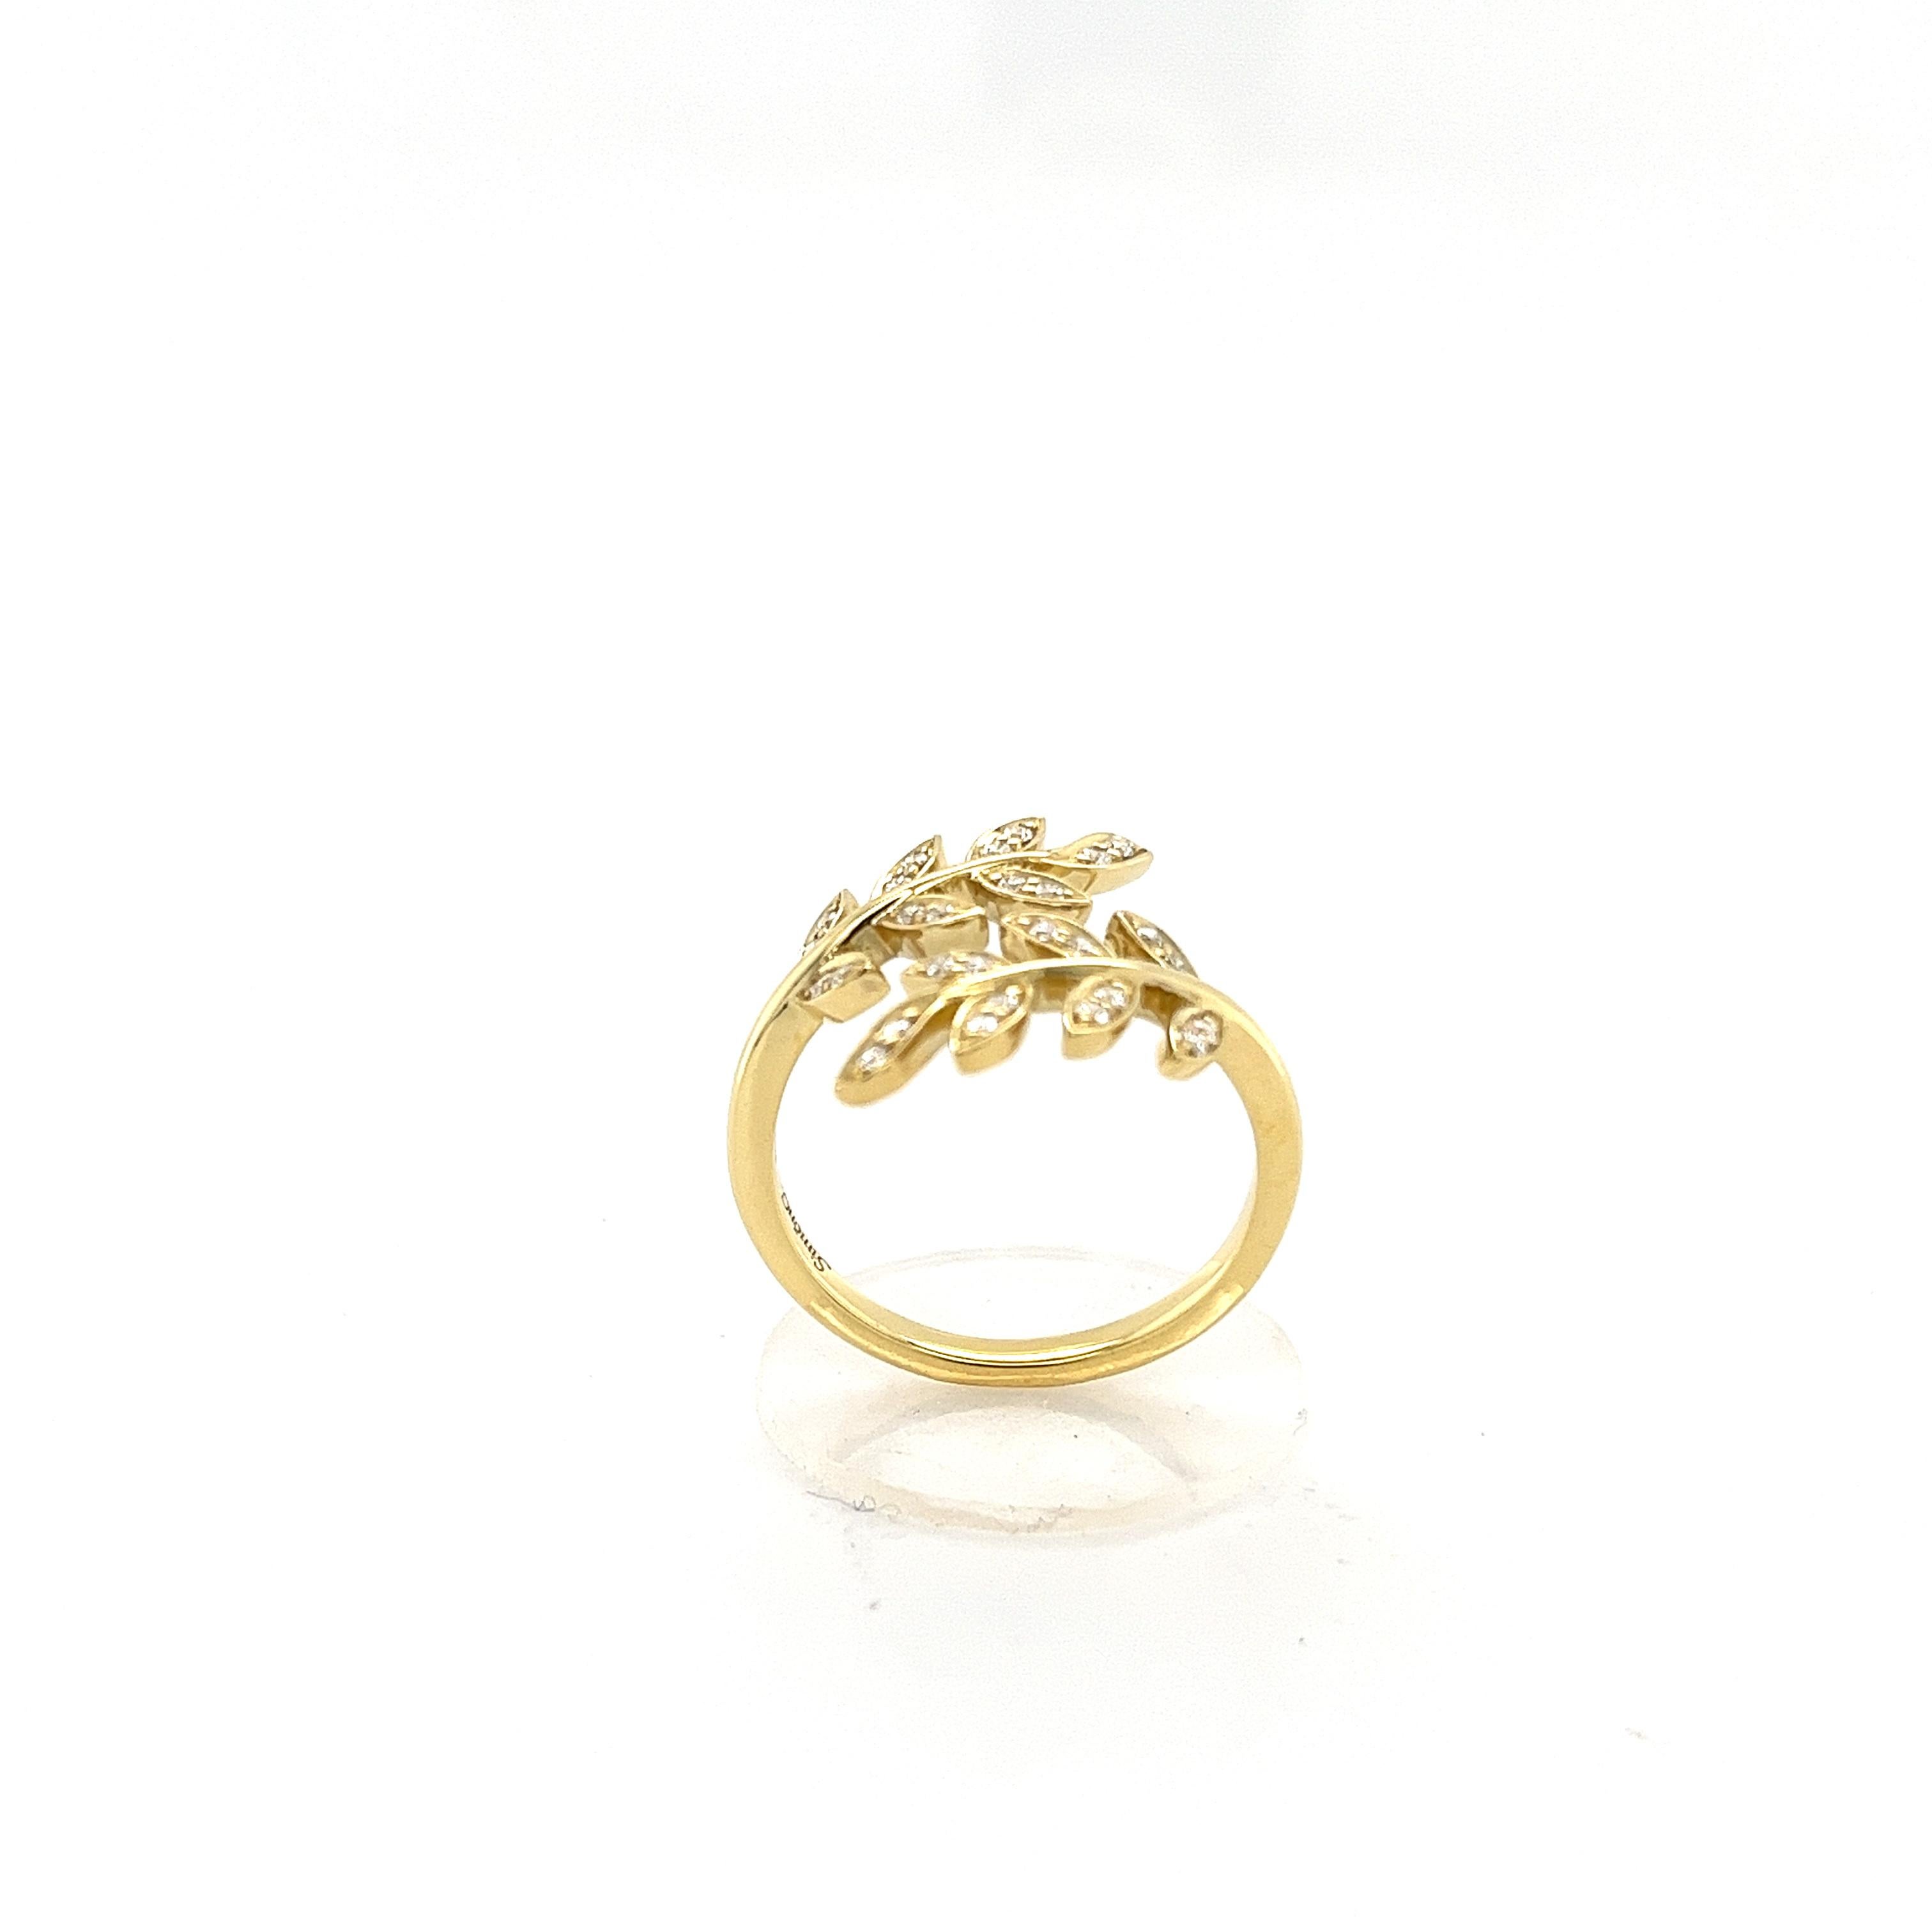 Simon G 18K Yellow Gold and Diamonds Open Style Ring Inspired by Nature For Sale 2